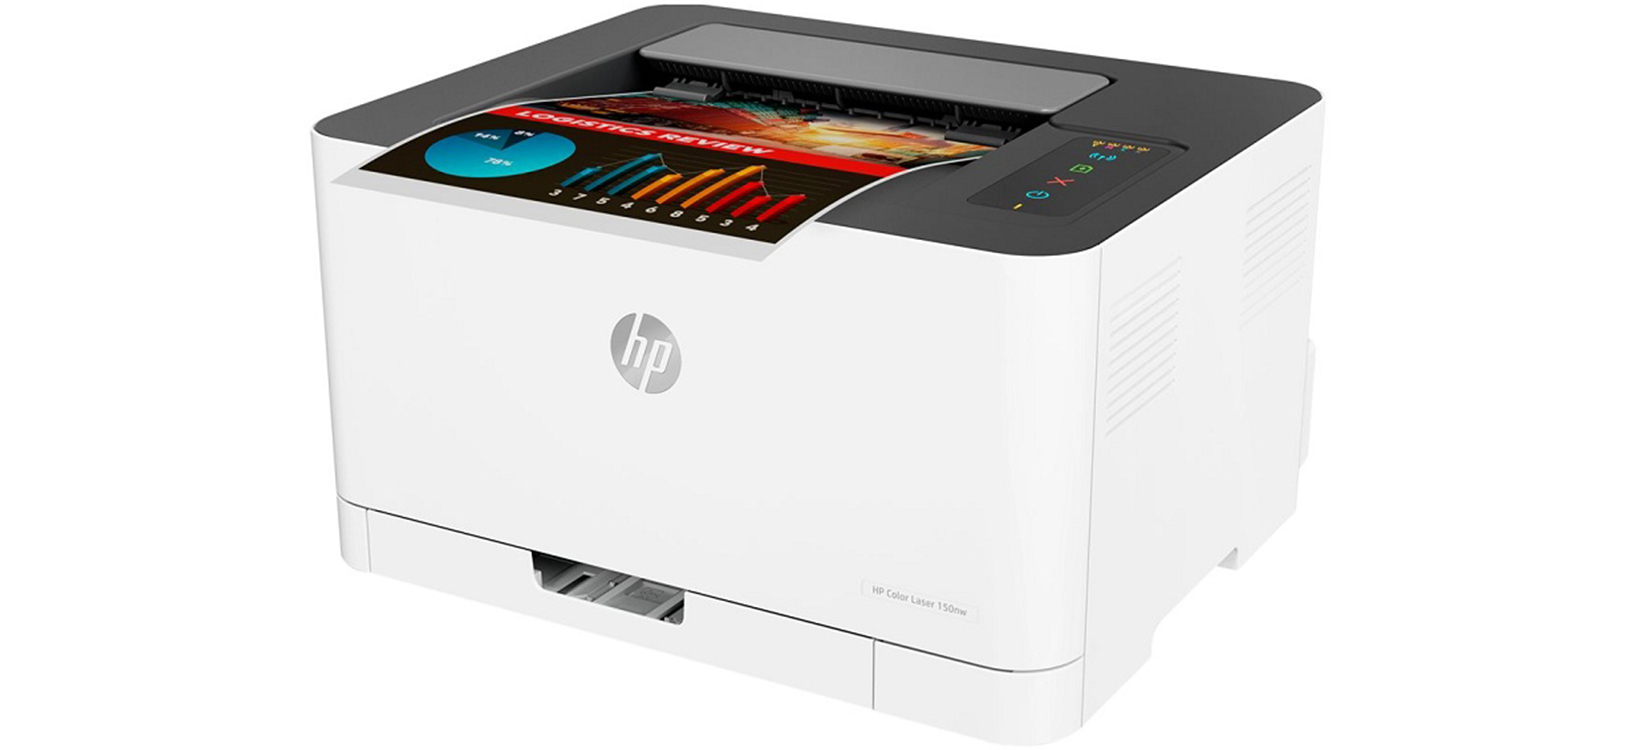 54969_may-in-mau-hp-color-laser-150nw-4z